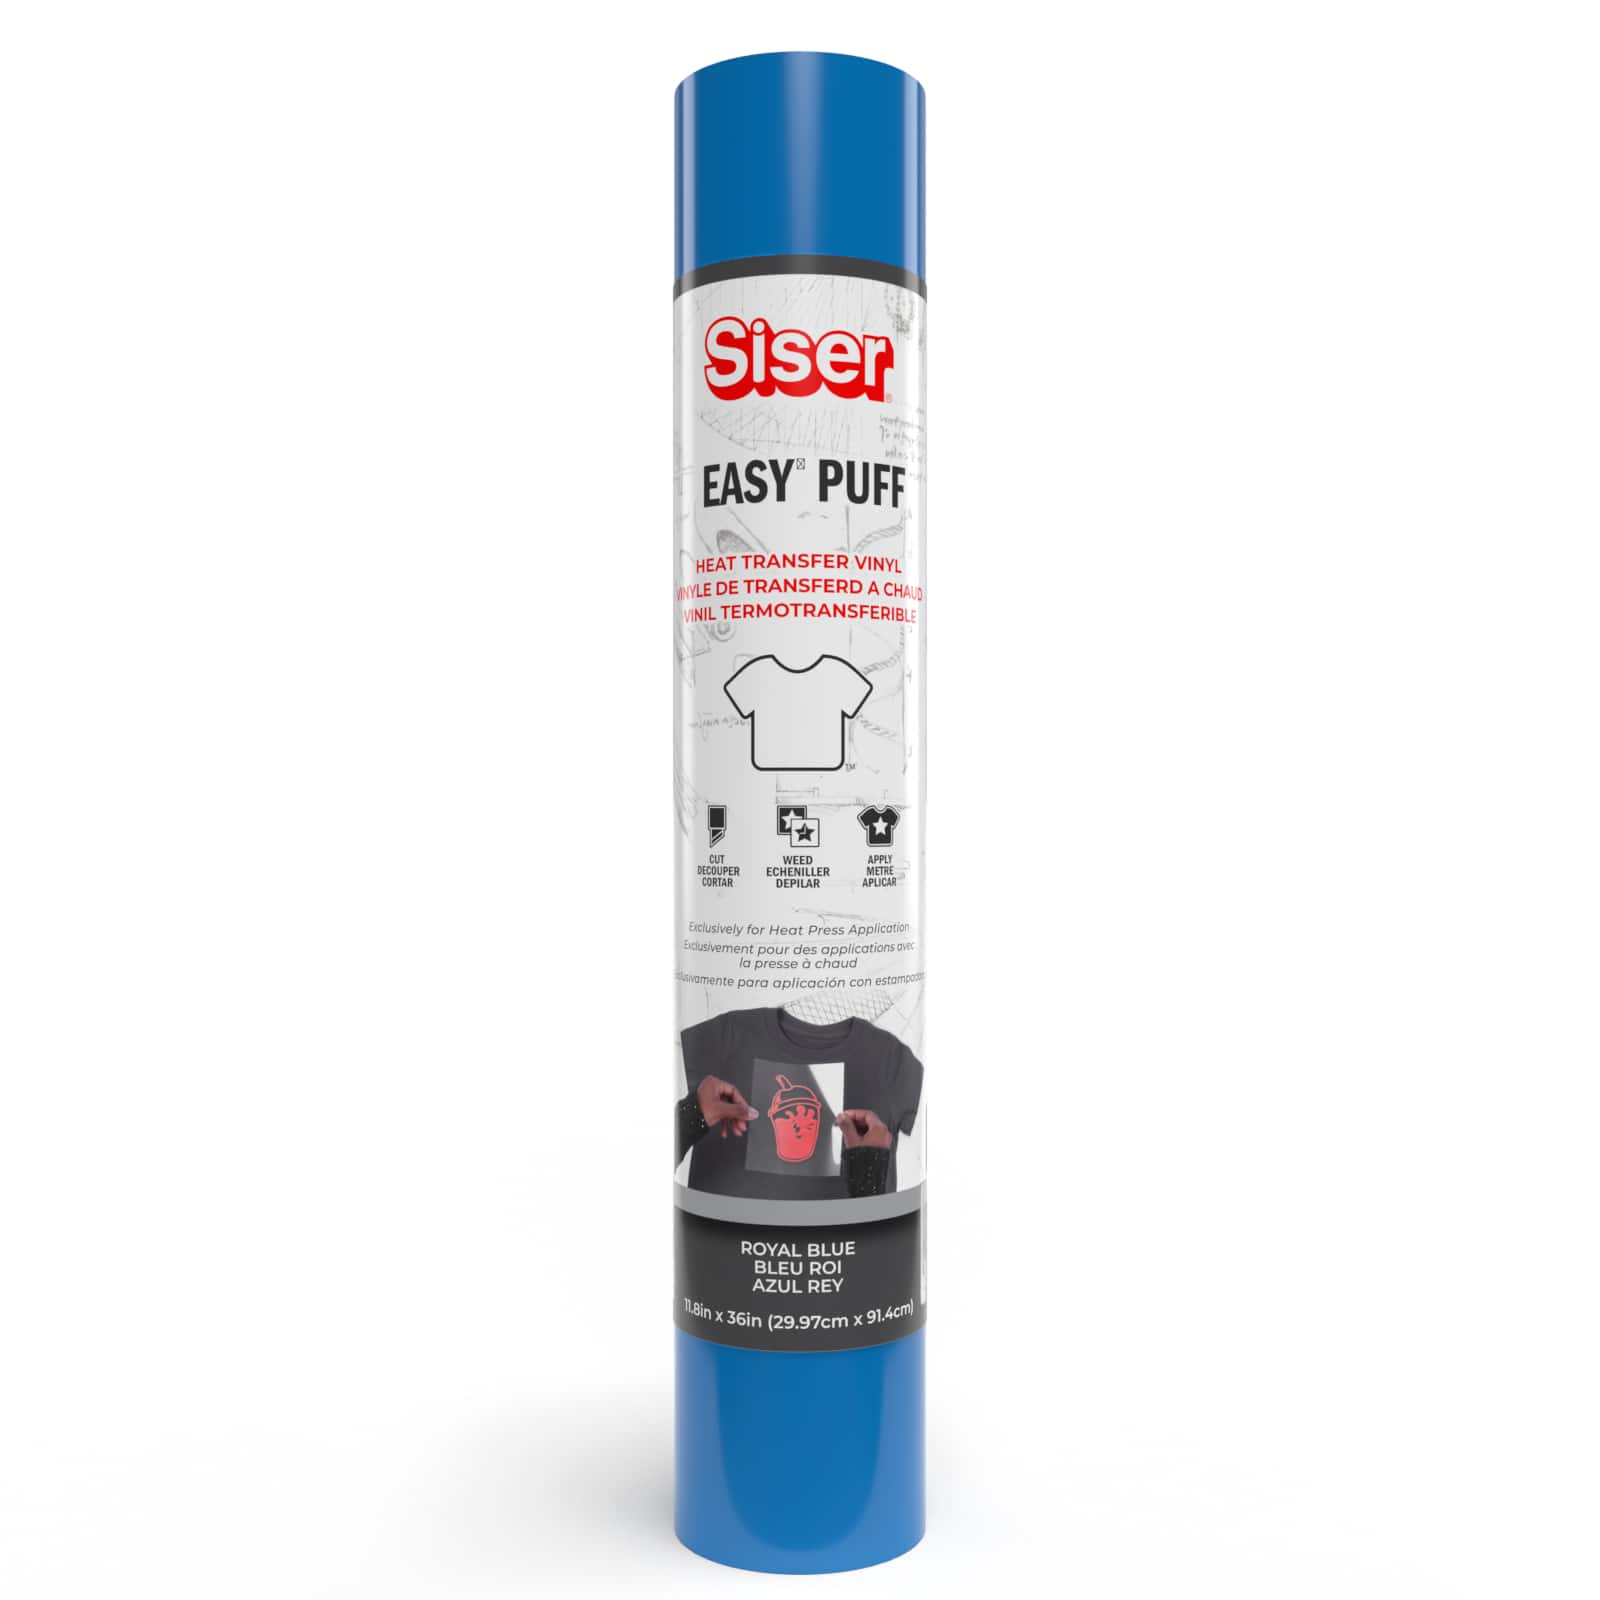 New to Siser Easy Puff HTV? See how it works in this quick video! #usc, puffed vinyl